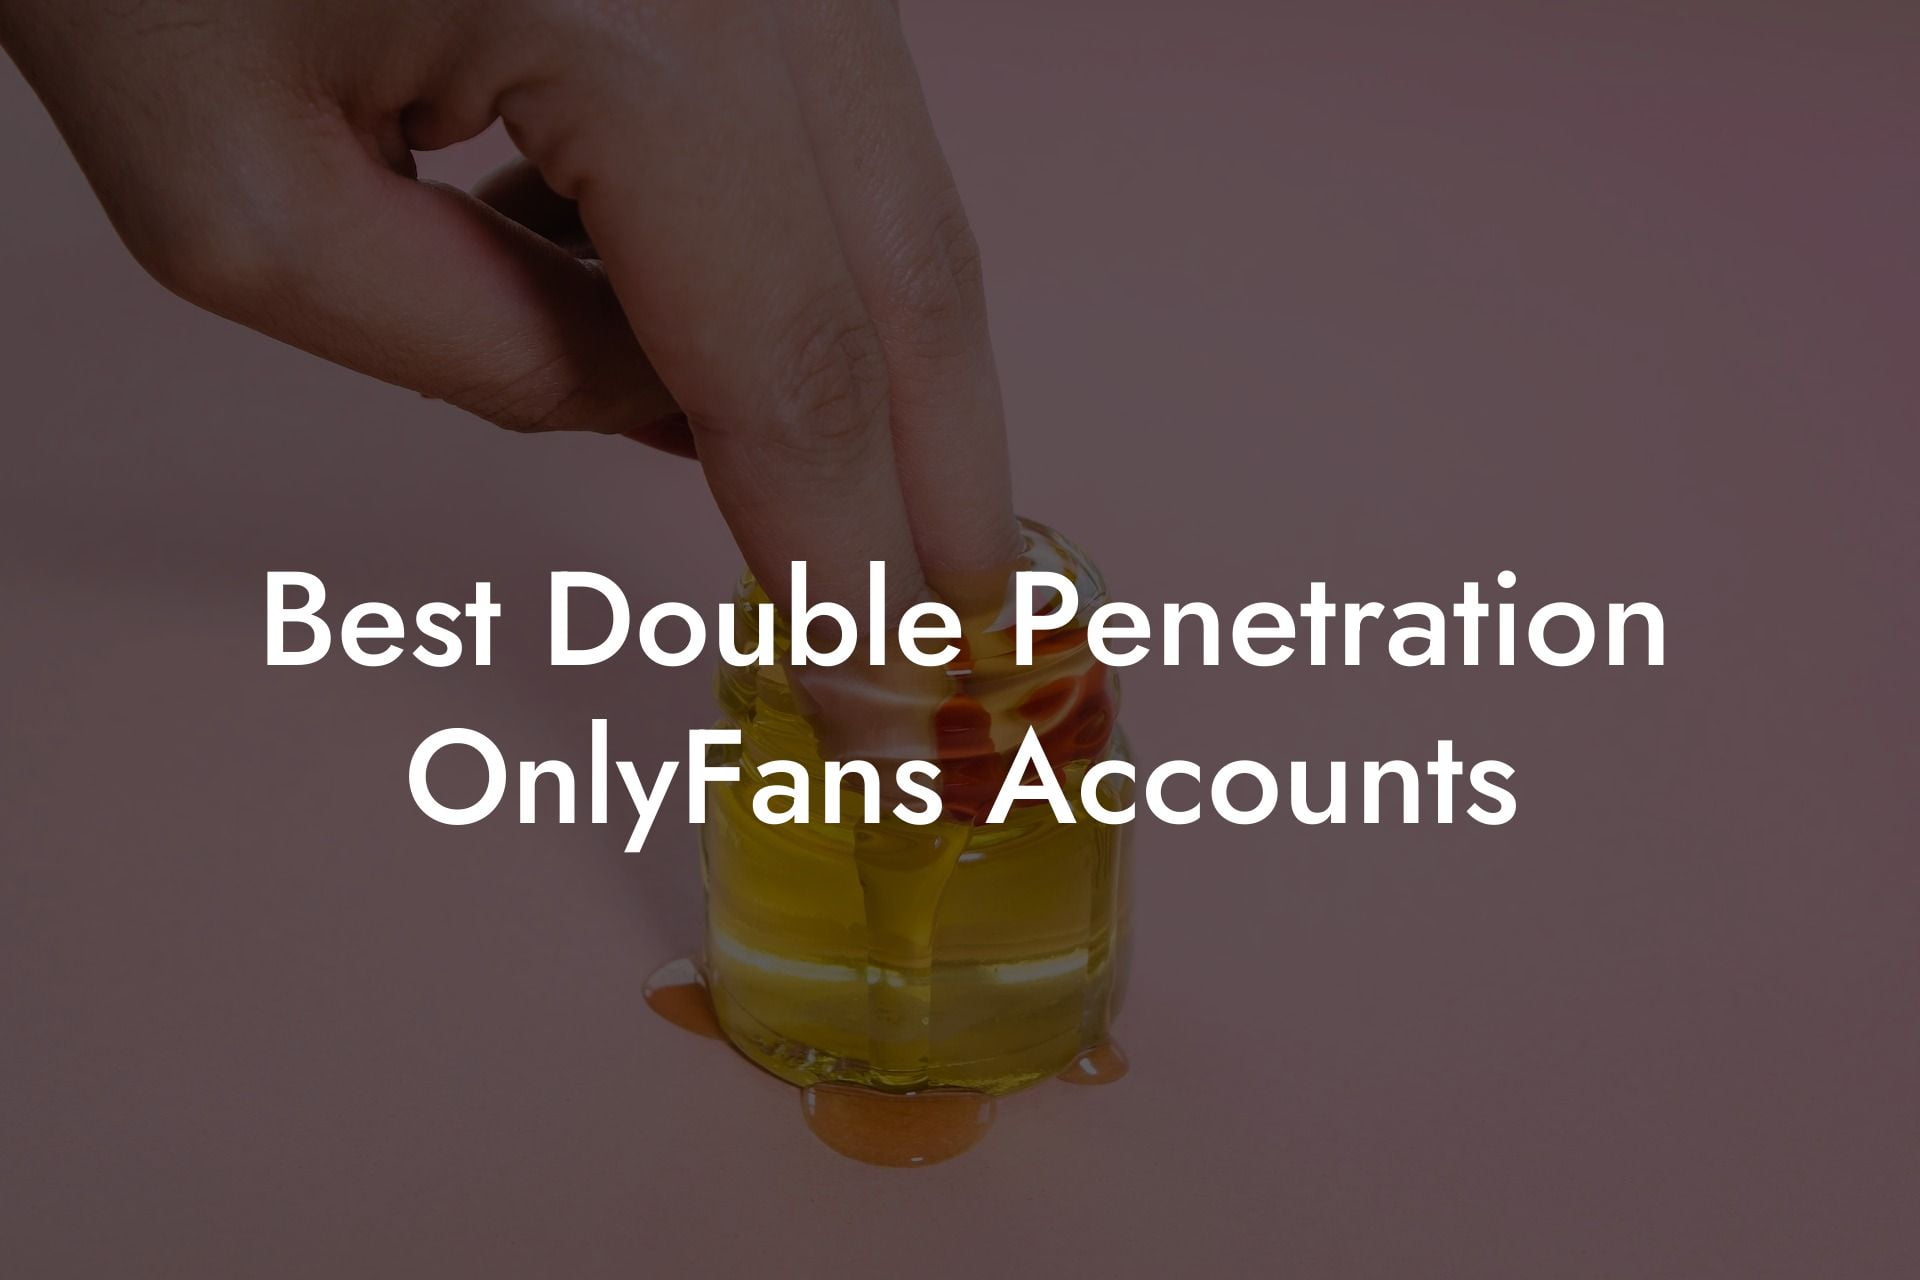 Best Double Penetration OnlyFans Accounts